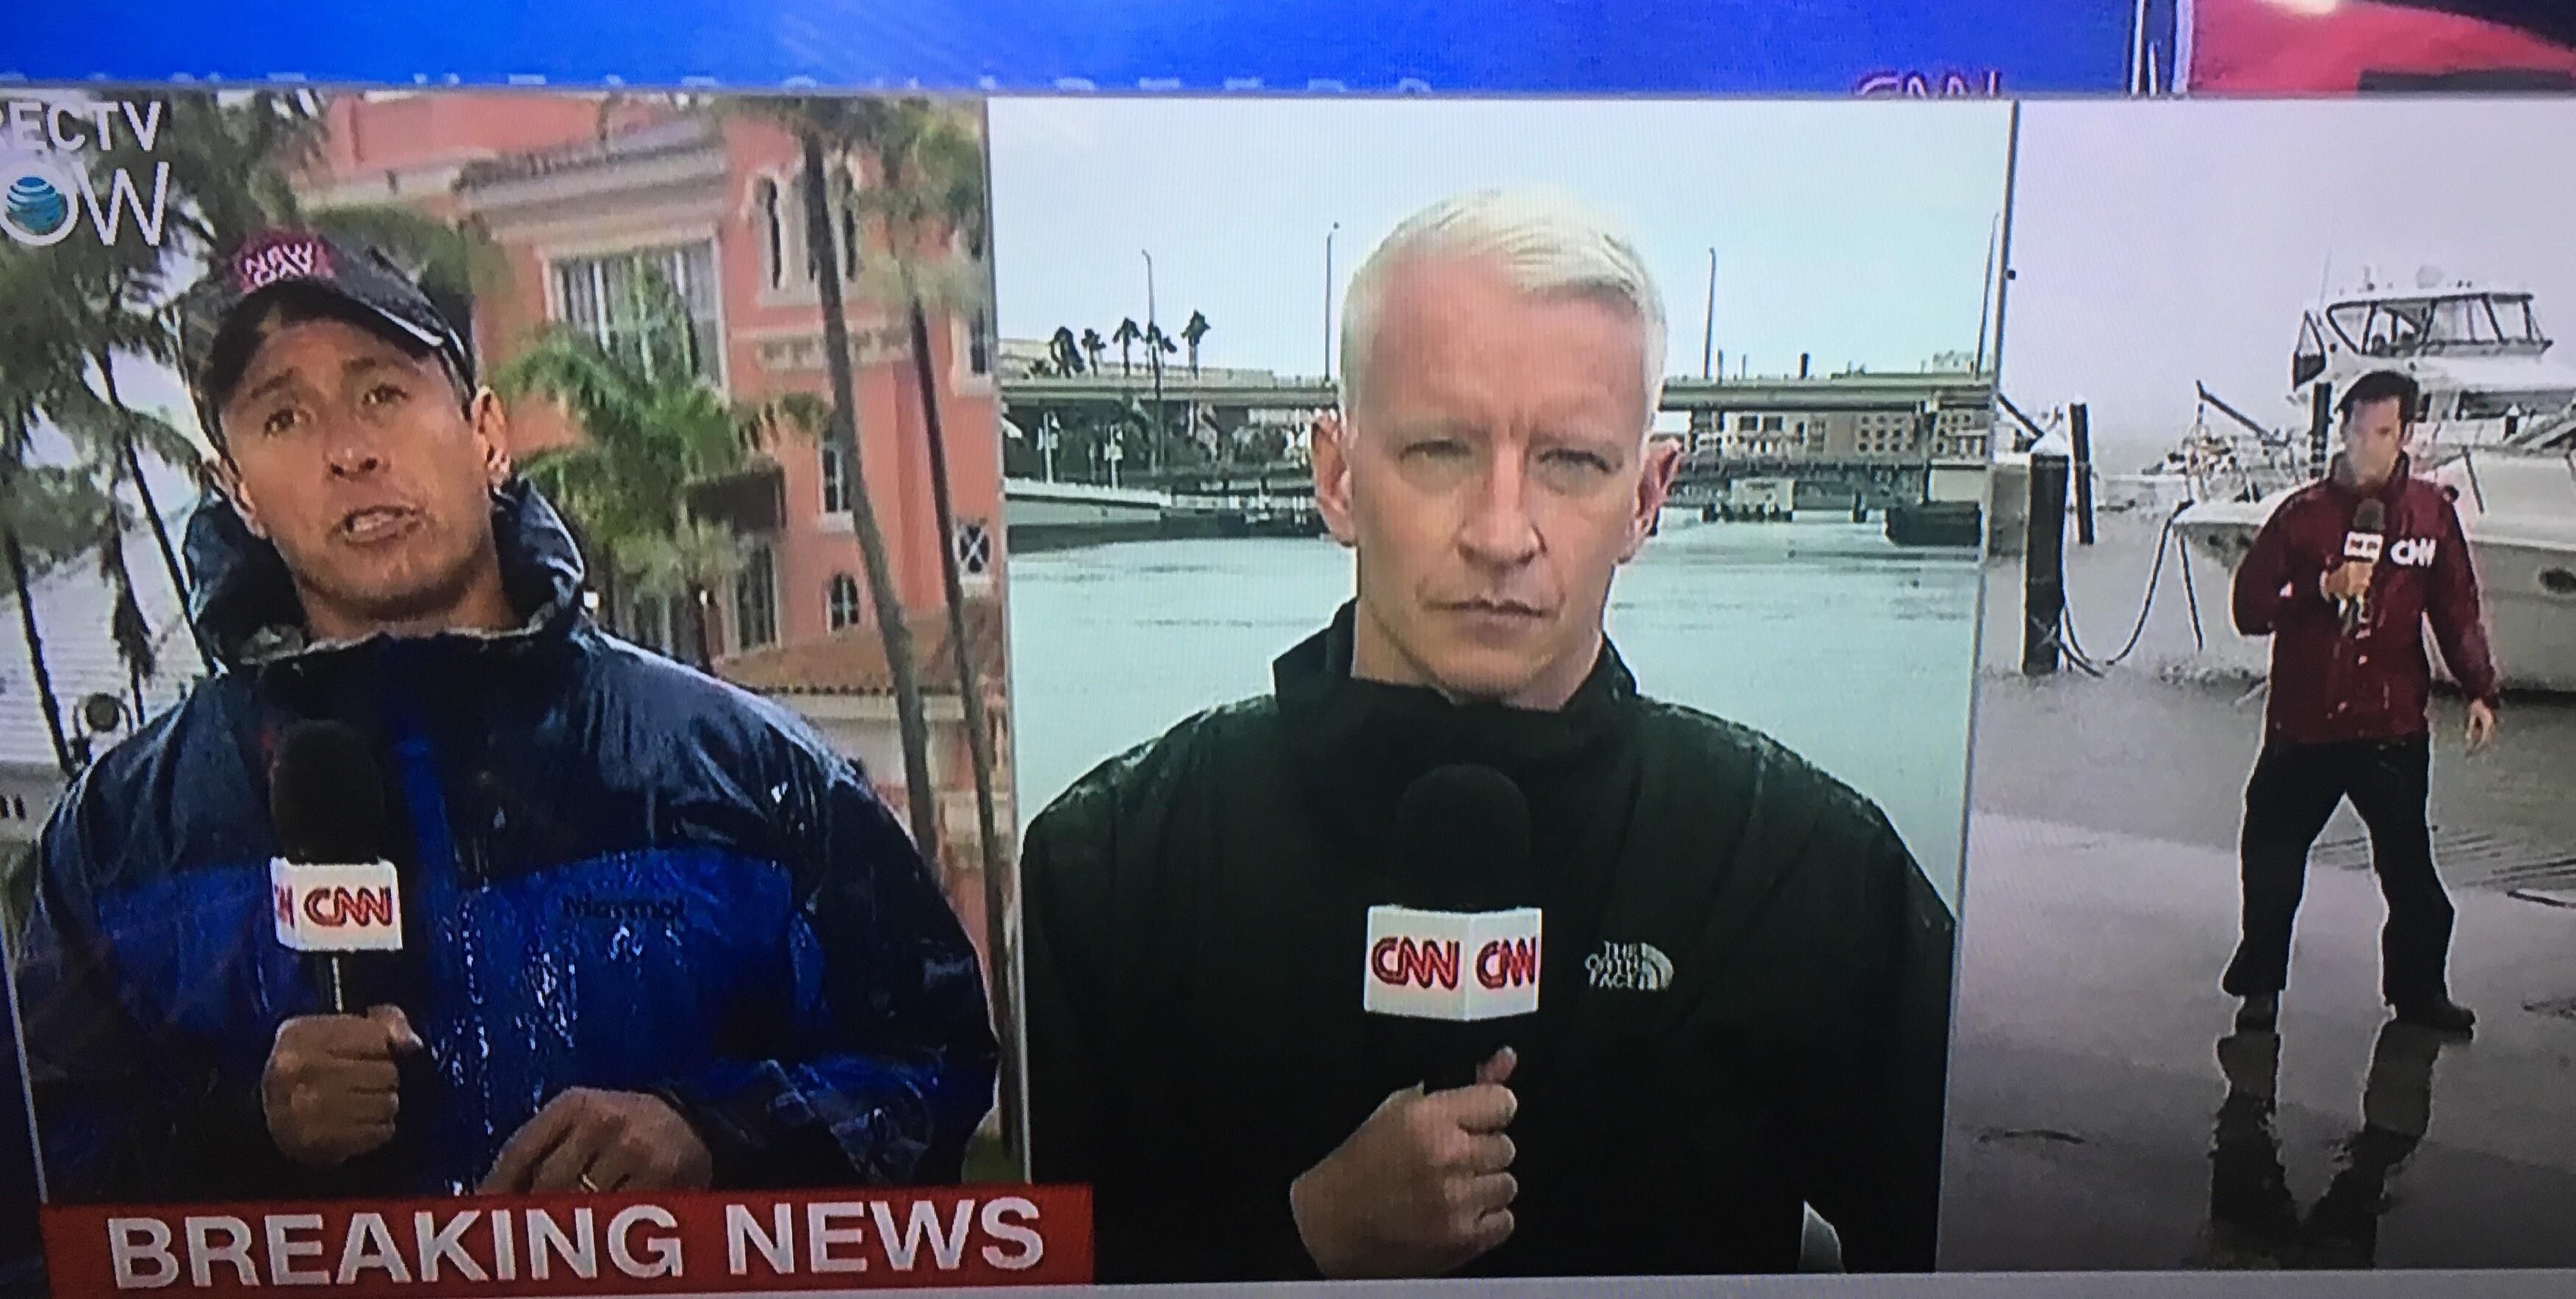 If I were in Florida I would take shelter in Anderson Cooper's hair, which seems to be the only place in Florida not affected by the hurricane.